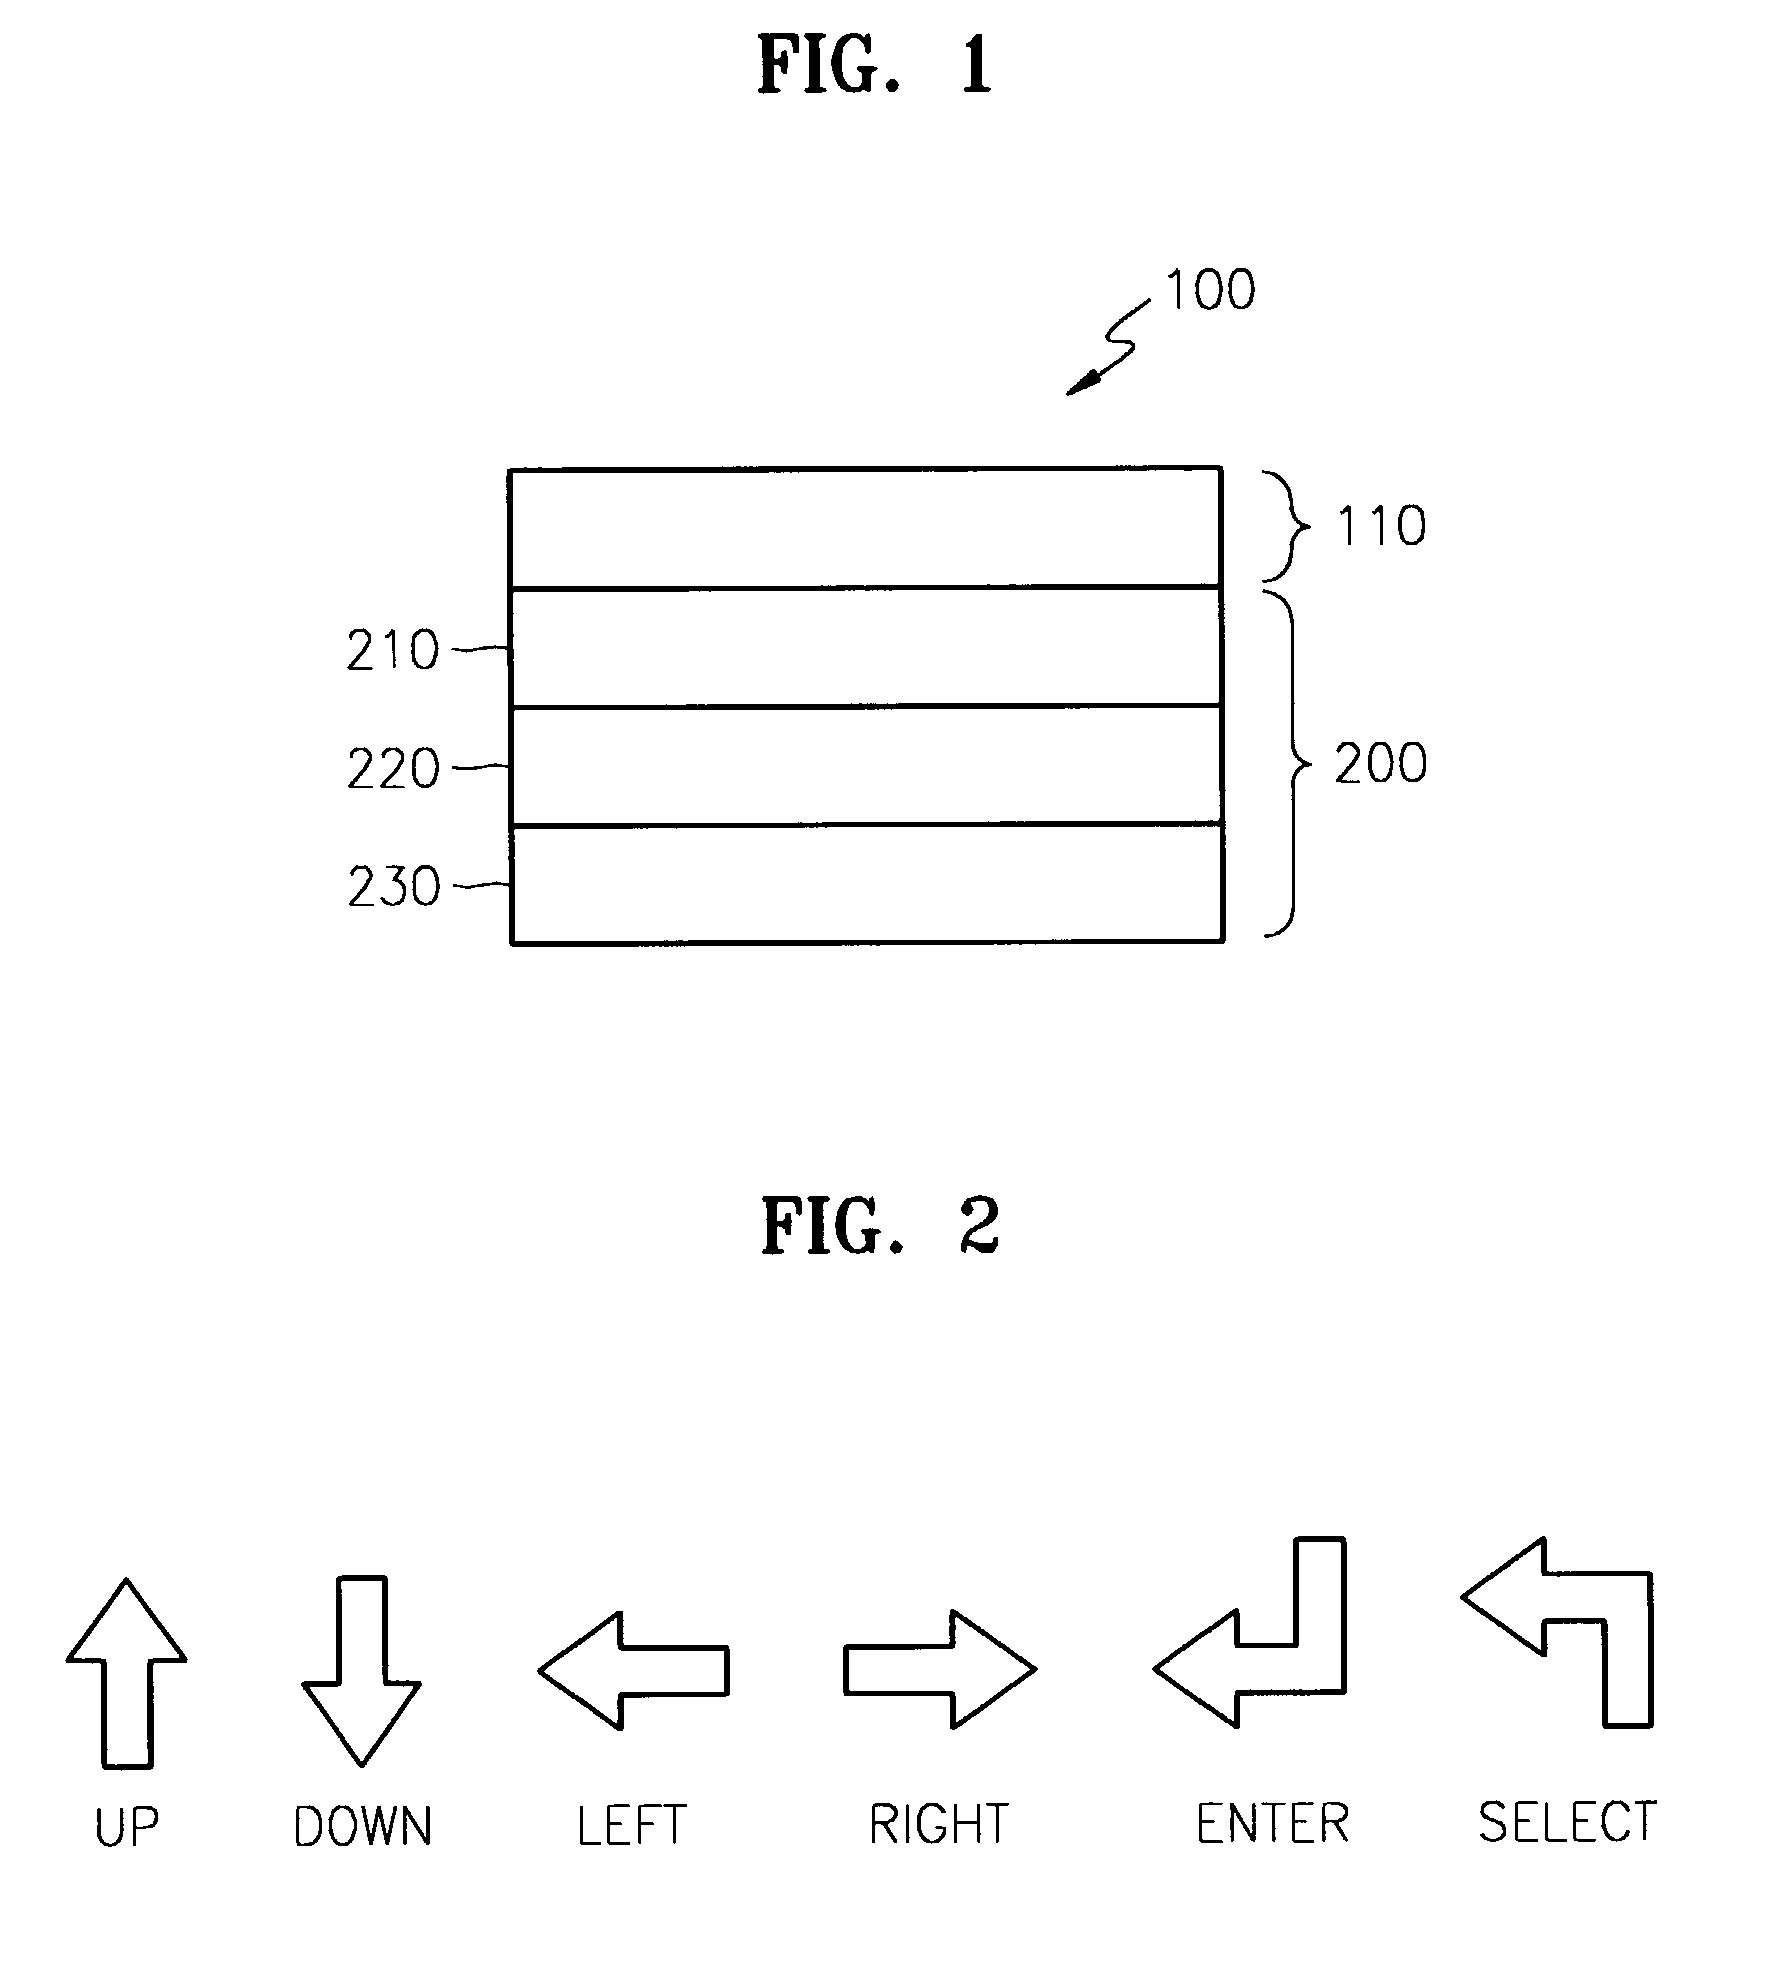 Method for inputting characters in portable device having limited display size and number of keys, and portable device using the same